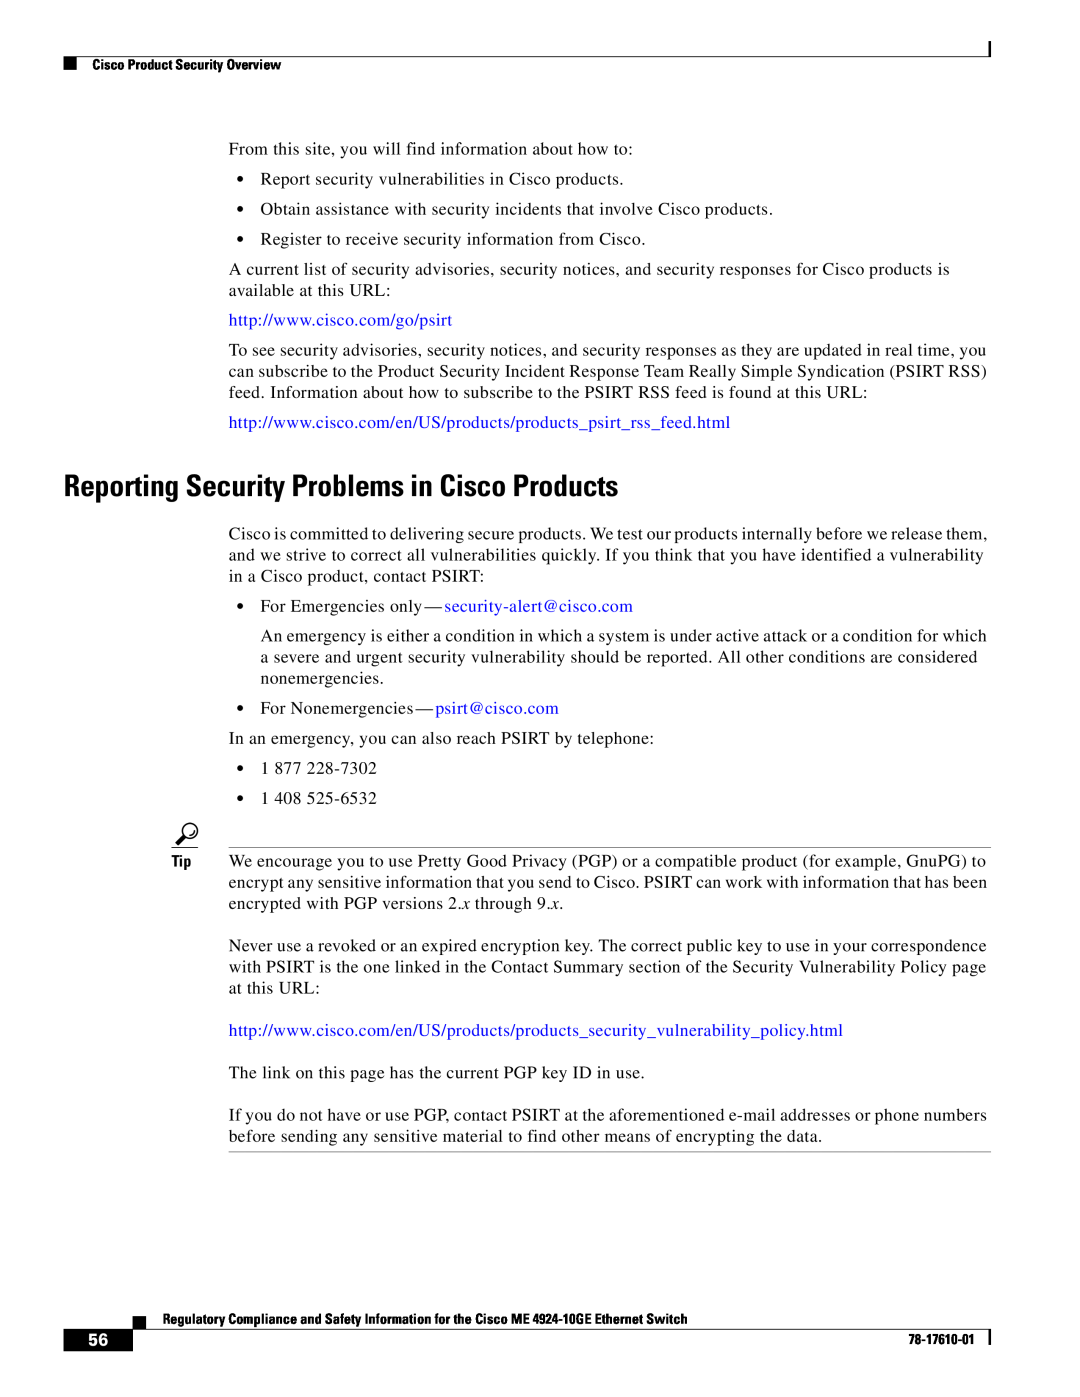 Cisco Systems ME 4924-10GE Reporting Security Problems in Cisco Products, For Emergencies only - security-alert@cisco.com 